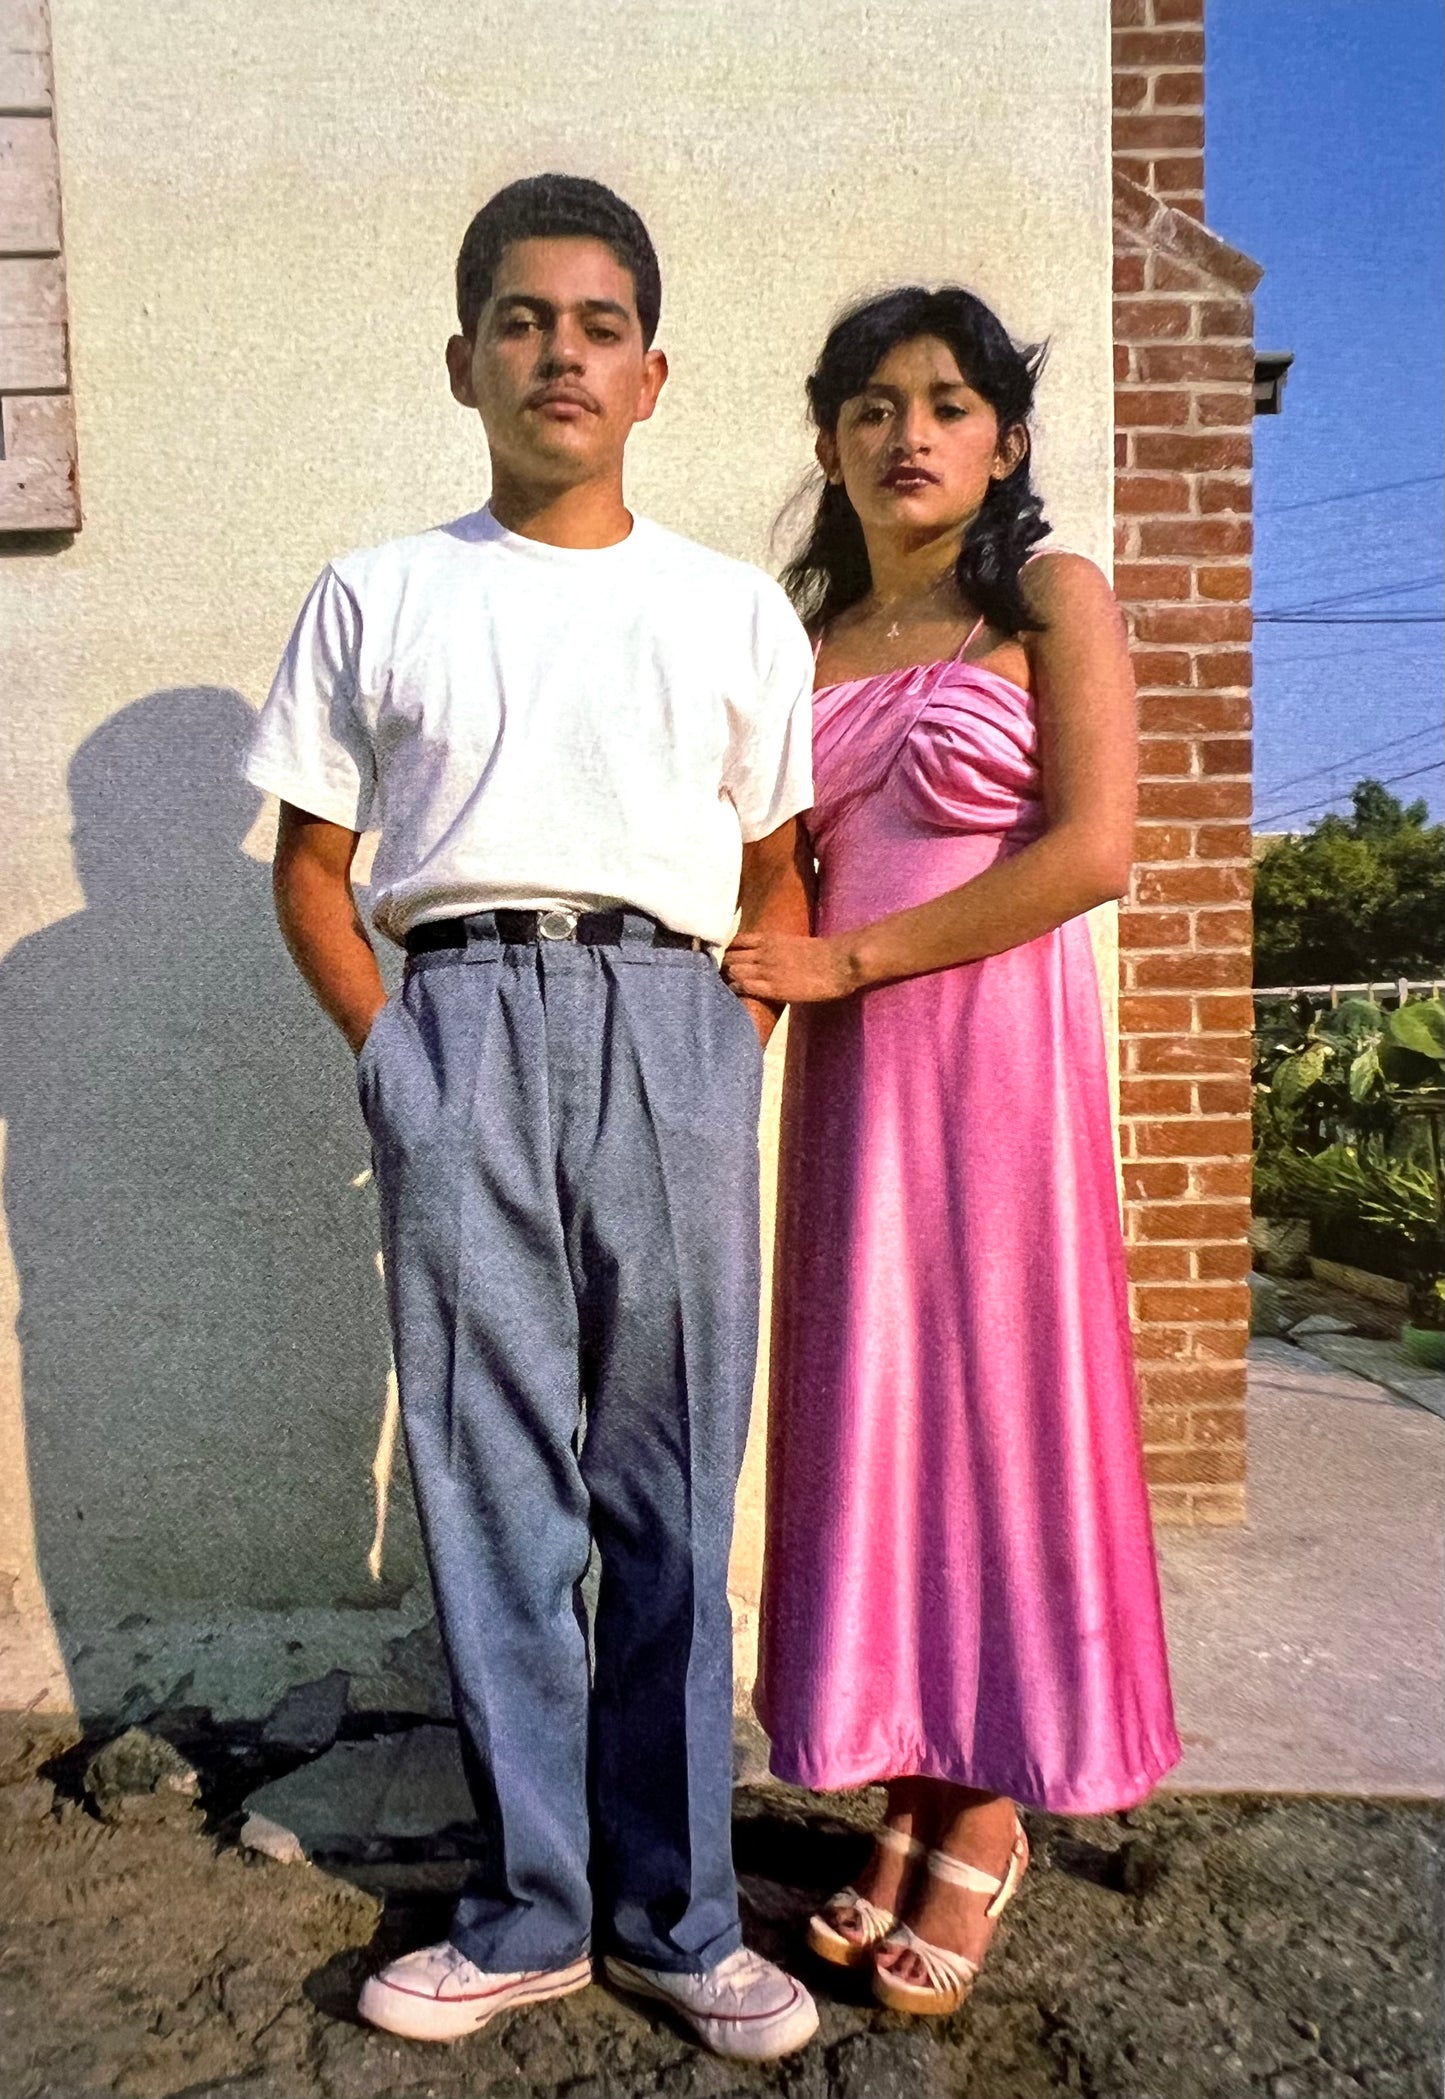 MEX/LA: Mexican Modernisms in Los Angeles 1930-1985